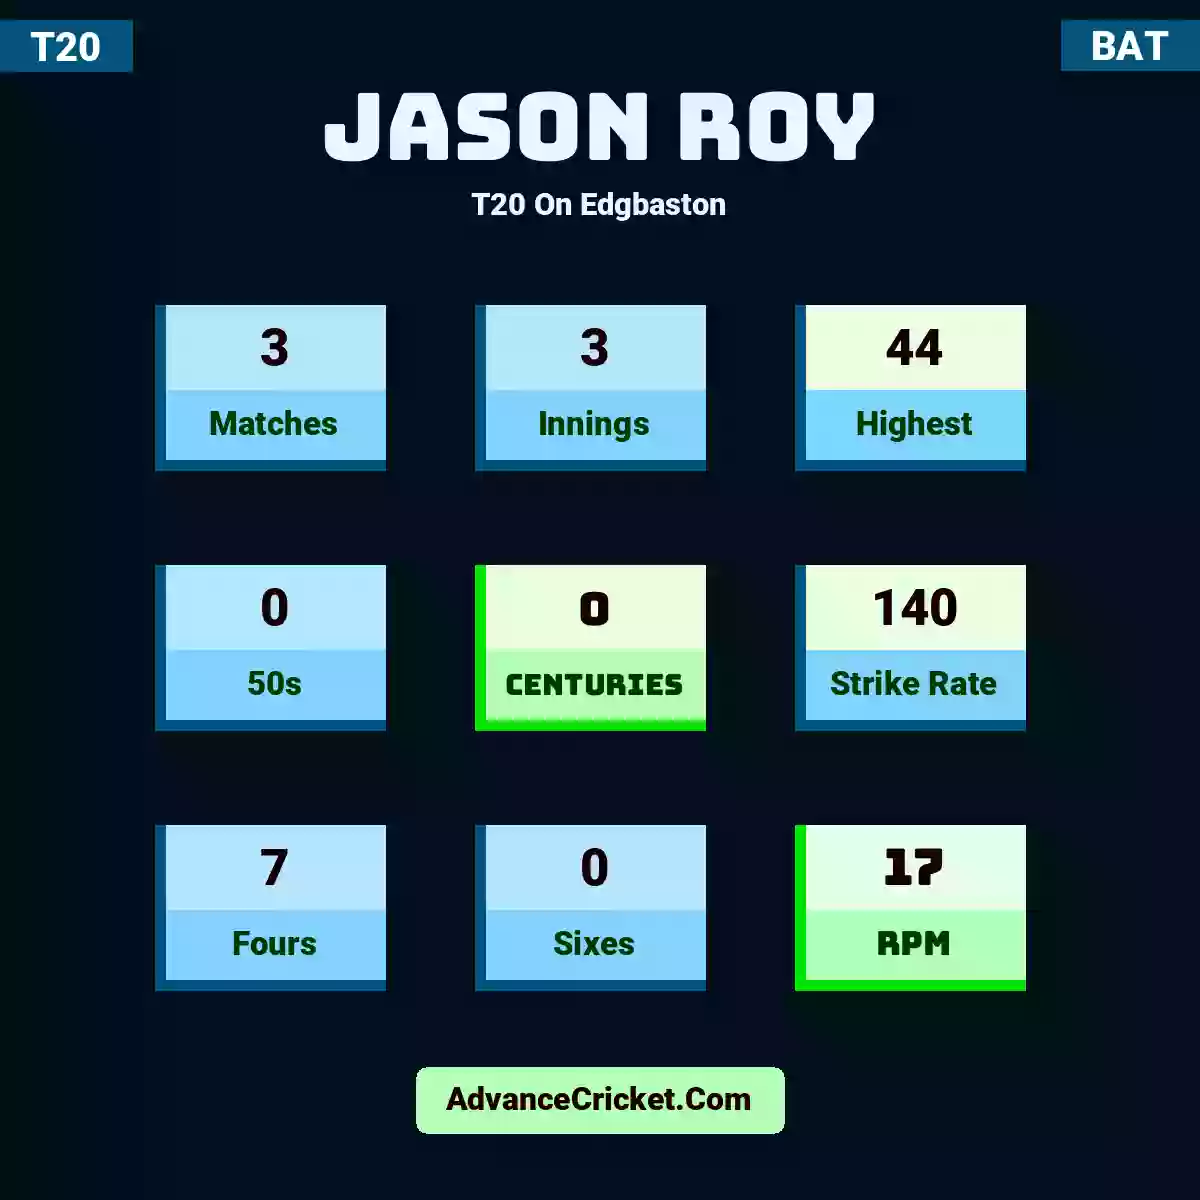 Jason Roy T20  On Edgbaston, Jason Roy played 3 matches, scored 44 runs as highest, 0 half-centuries, and 0 centuries, with a strike rate of 140. J.Roy hit 7 fours and 0 sixes, with an RPM of 17.